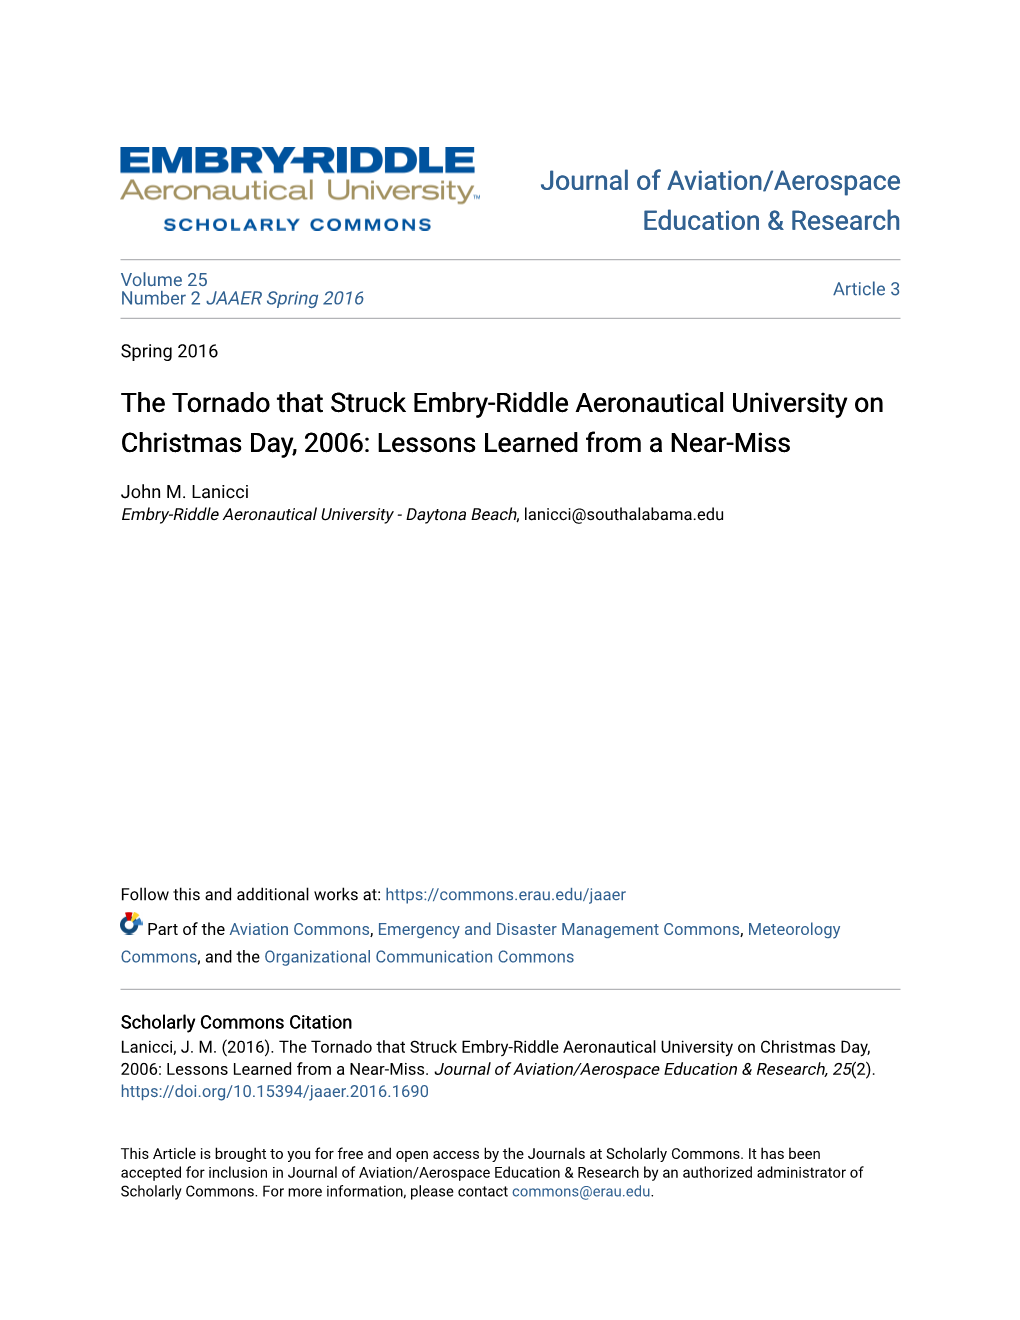 The Tornado That Struck Embry-Riddle Aeronautical University on Christmas Day, 2006: Lessons Learned from a Near-Miss